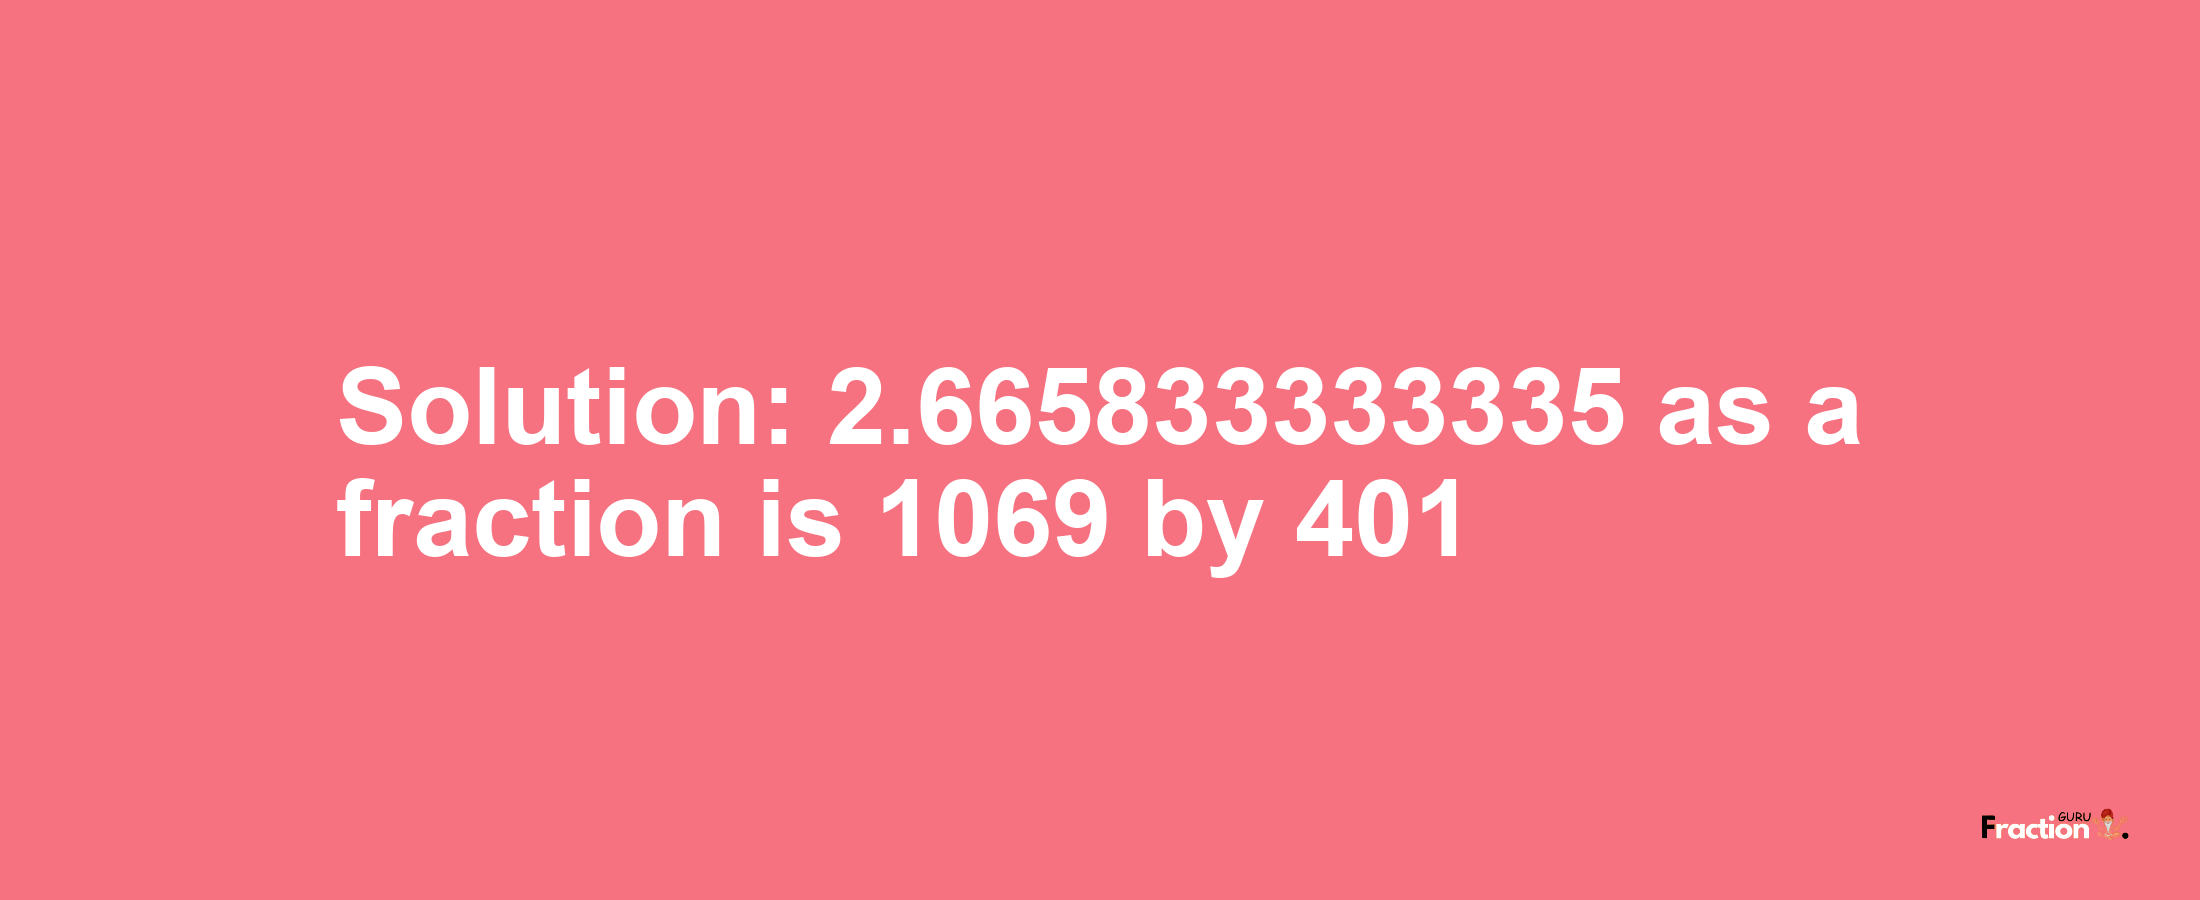 Solution:2.665833333335 as a fraction is 1069/401